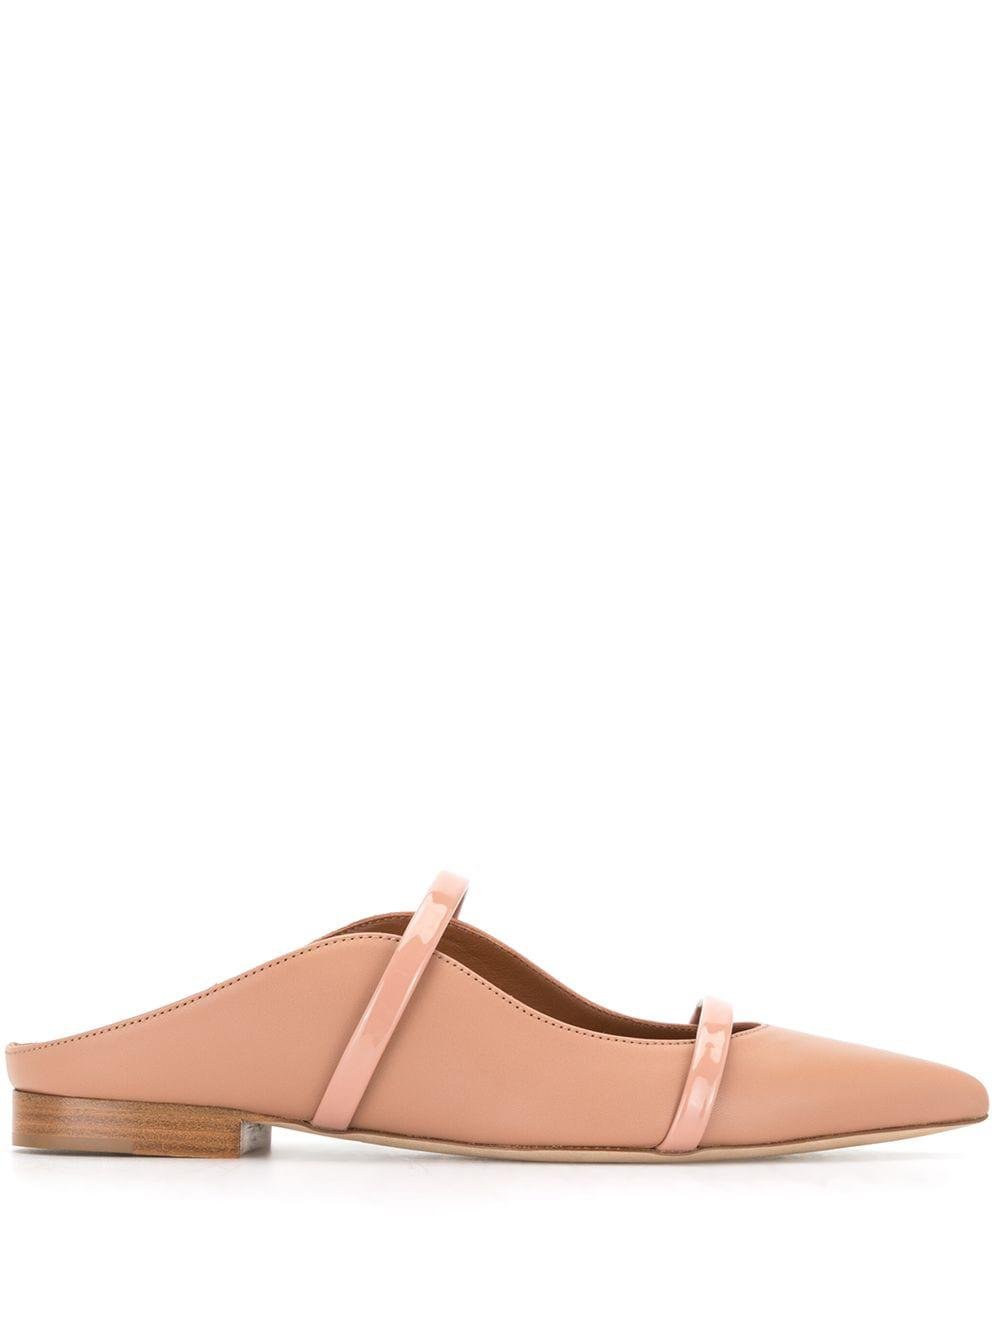 Maureen strappy ballerinas by MALONE SOULIERS